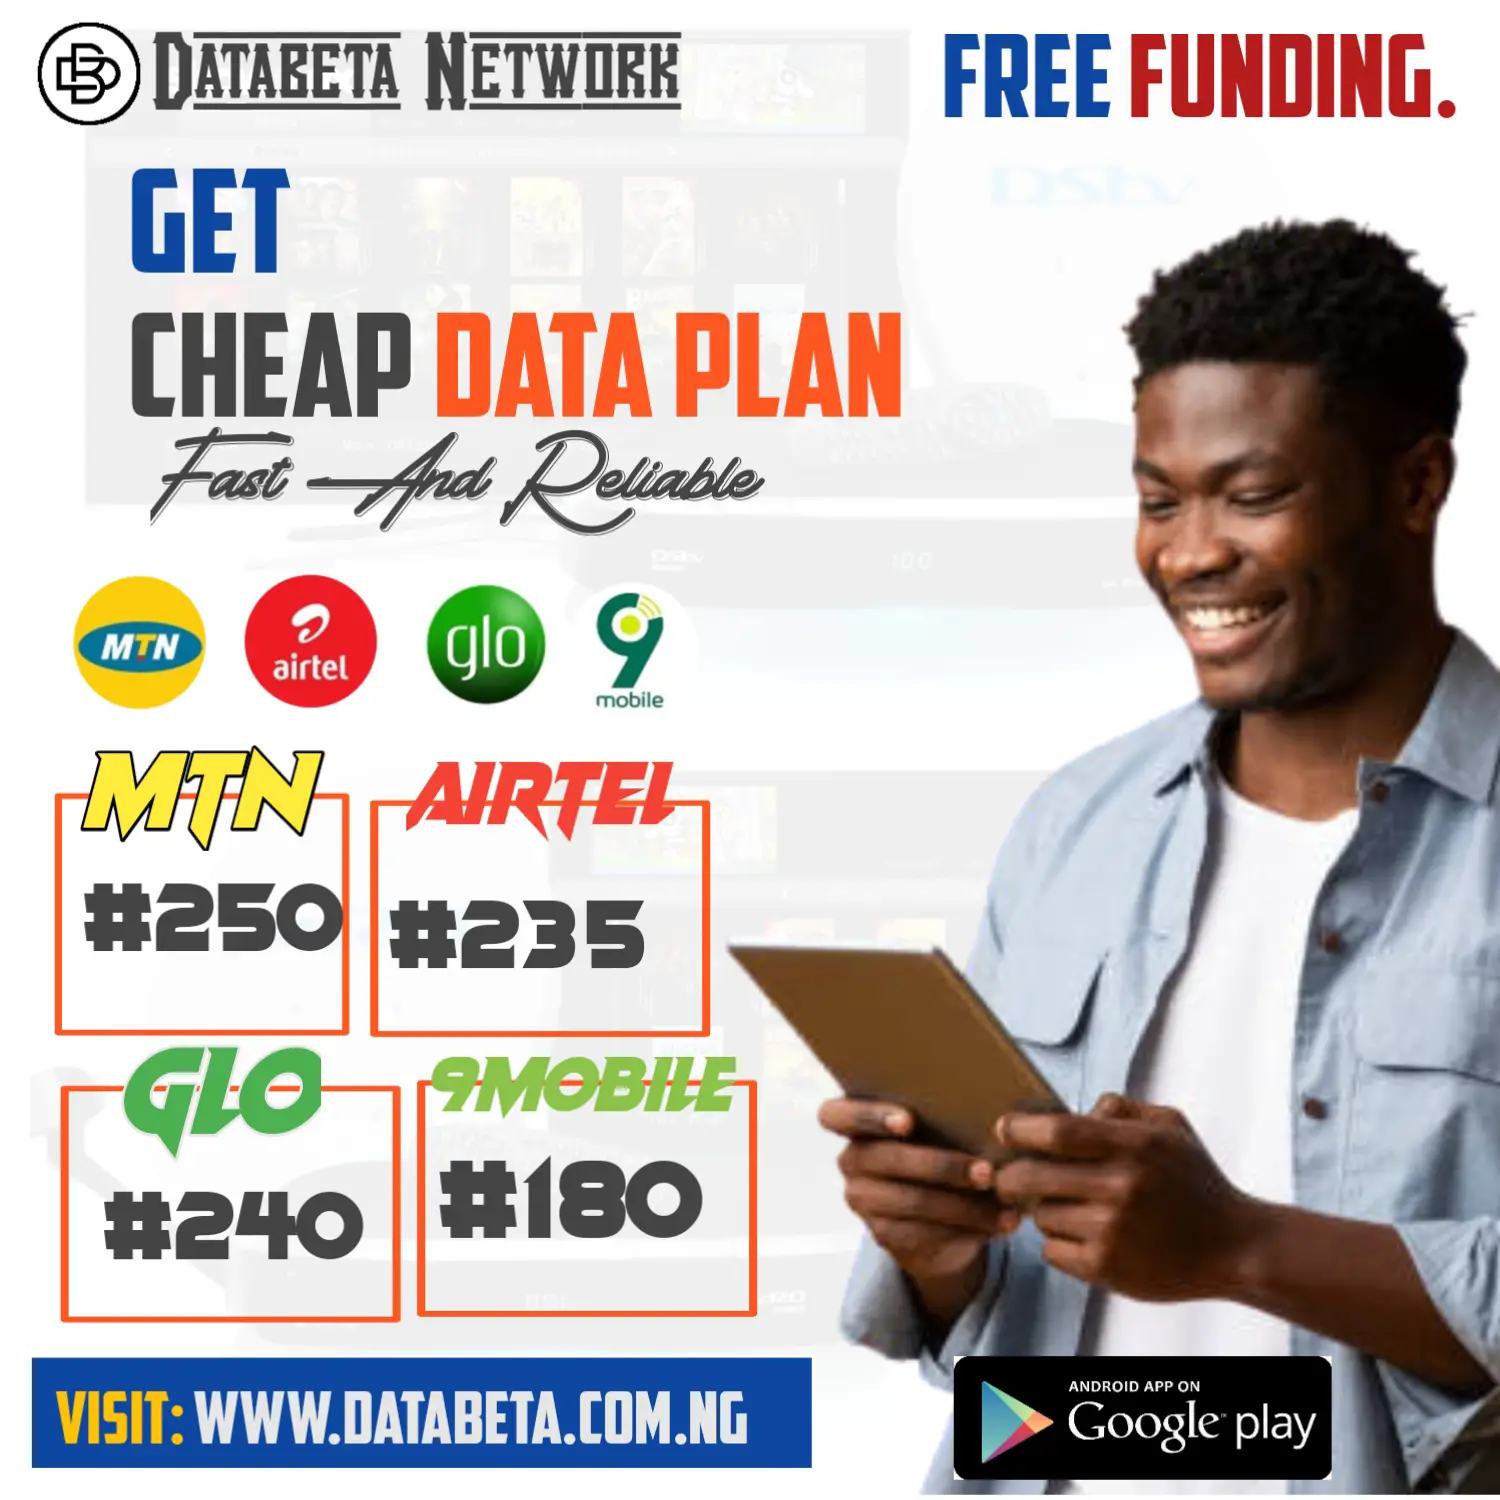 Databeta - Buy Data, Airtime And More